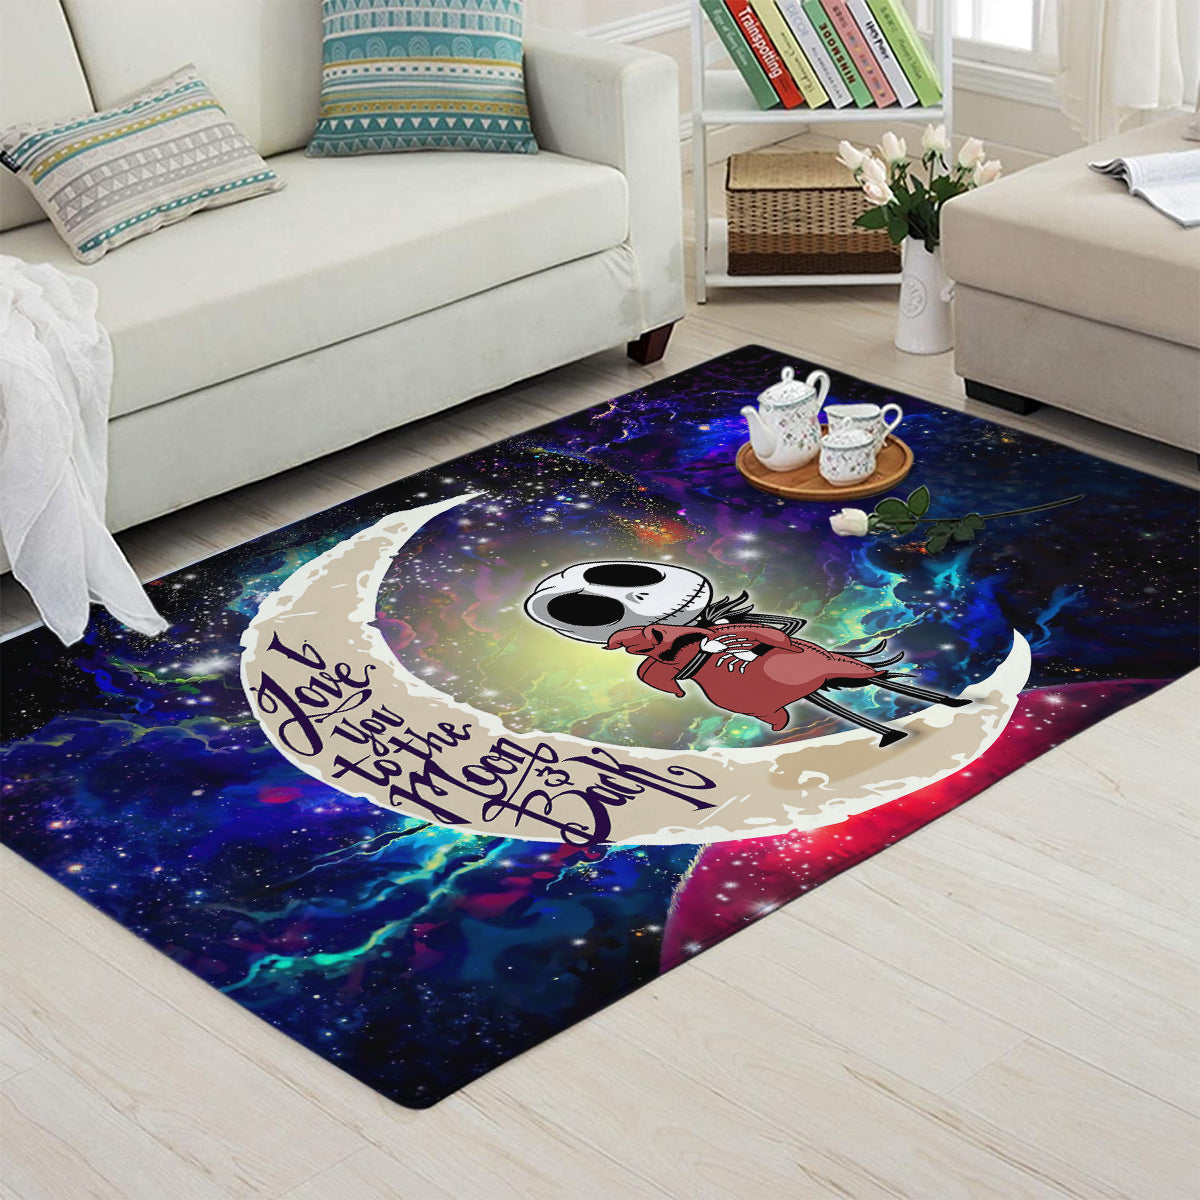 Jack Skellington Nightmare Before Christmas Love You To The Moon Galaxy Carpet Rug Home Room Decor